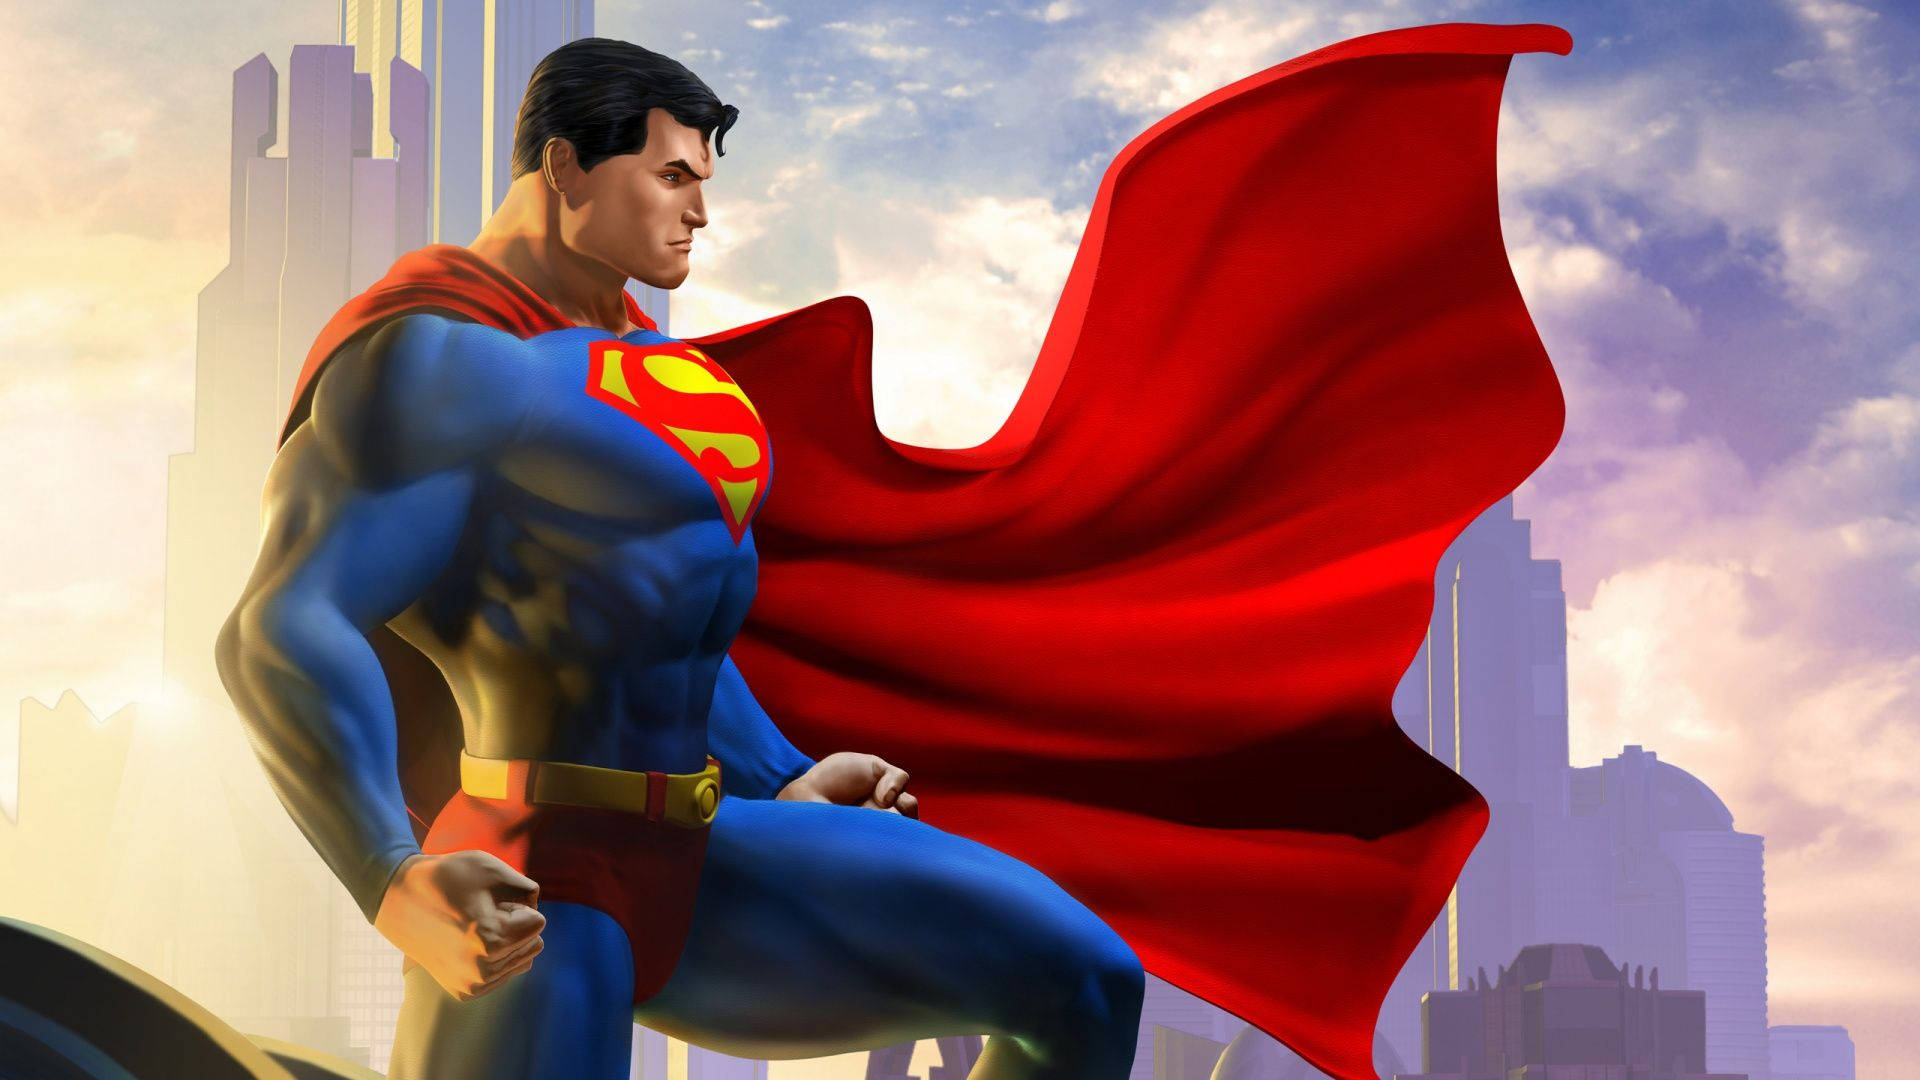 The Man of Steel Soars Over the City Wallpaper